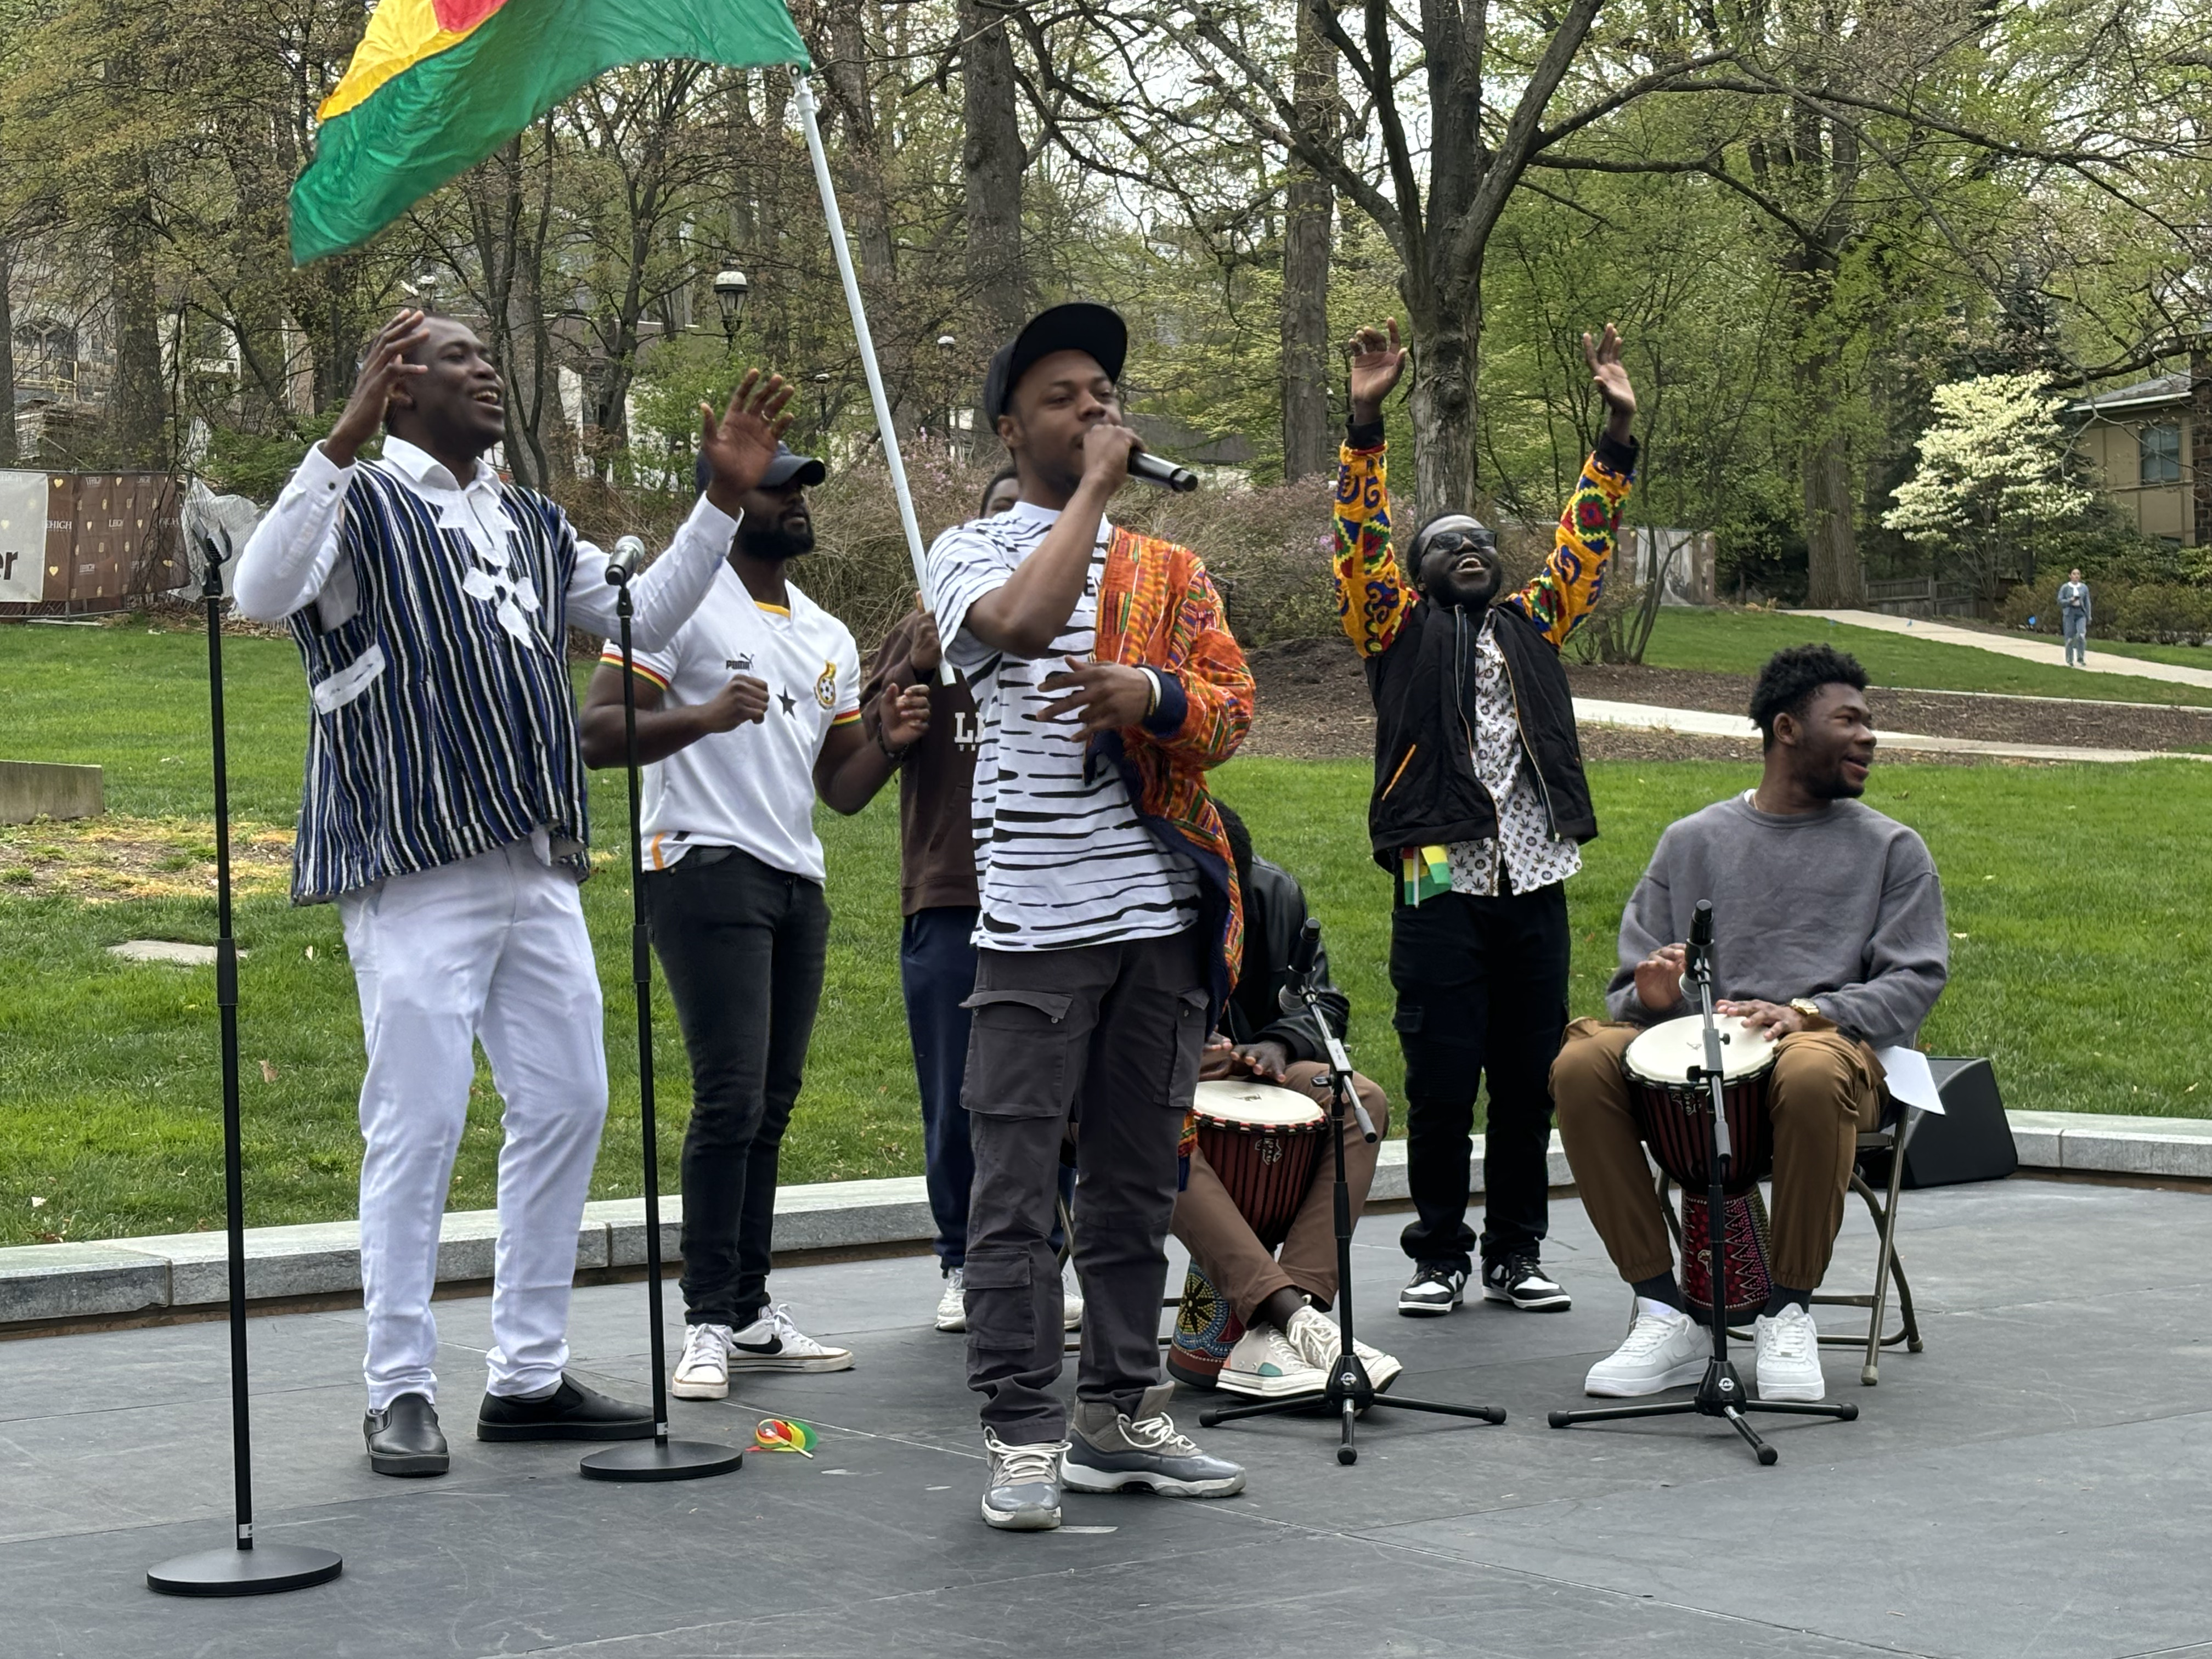 The Ghanaian Student Assocation performing at Lehigh University